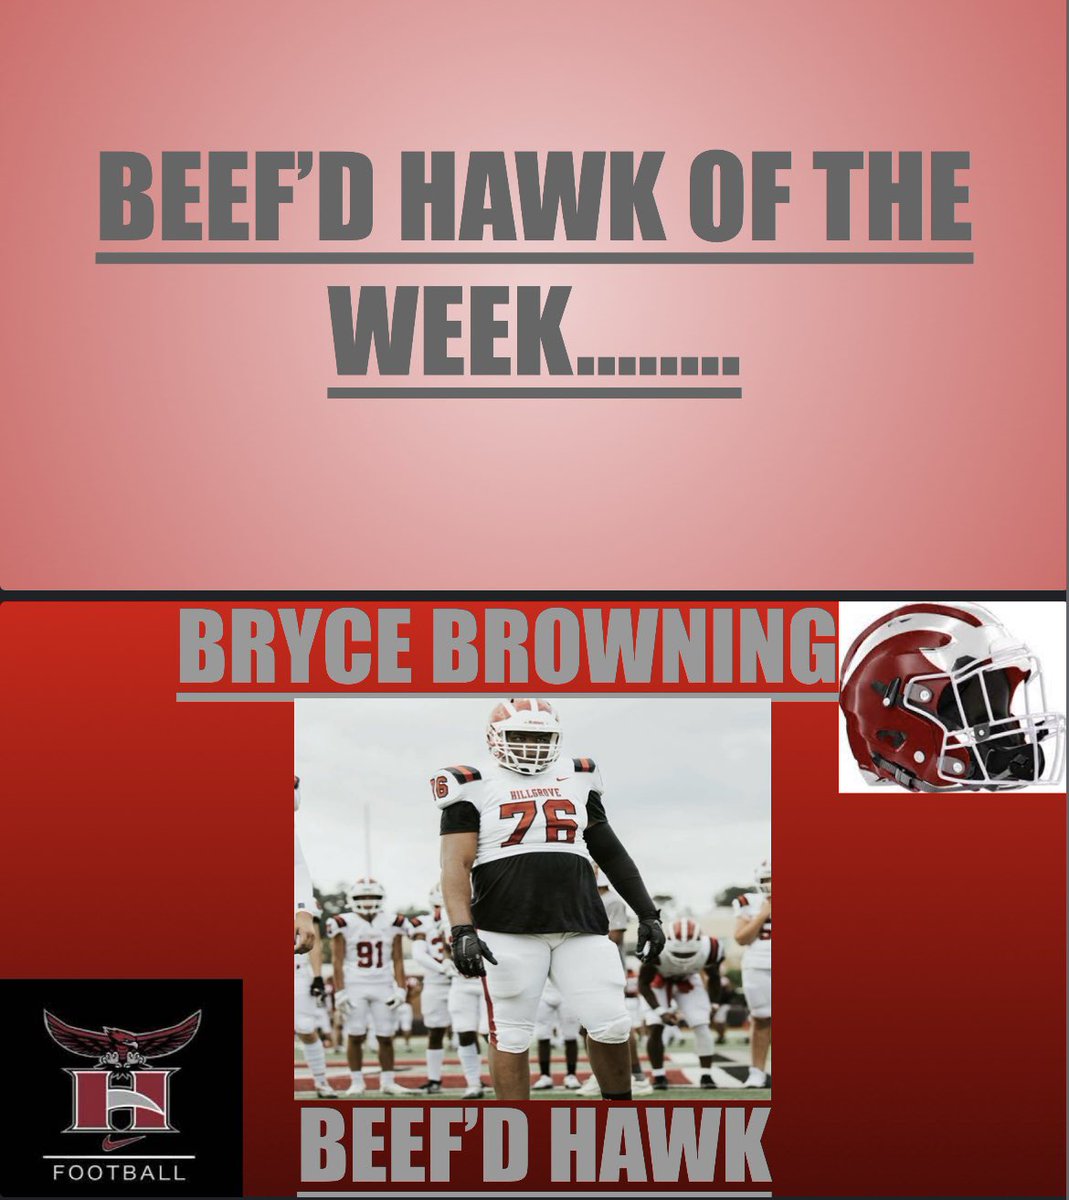 First week of spring ball is in the books! BEEF’D HAWK OF THE WEEK: @BBrowning_76 Bryce had a GREAT first week. BIG senior year loading‼️